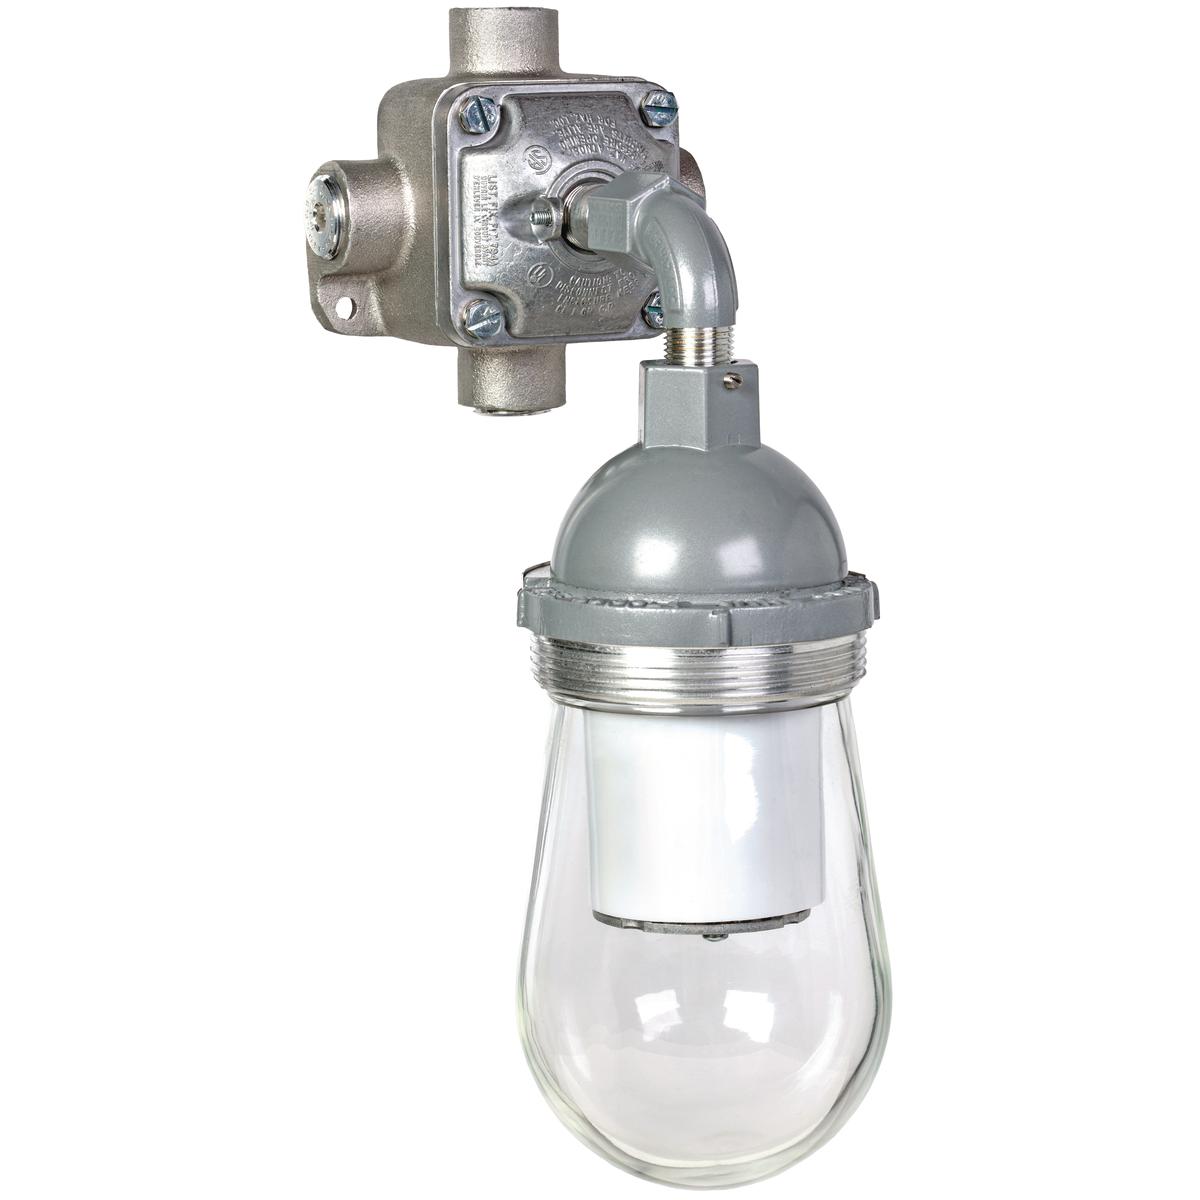 Hubbell DVL1630B2G The DVL Series is a Dust Tight/ Utility fixture using energy efficient LED's. This fixture is made with a cast copper-free aluminum housing and mount that is  suitable for harsh and hazardous environments. With the design of this fixtures internal heat si